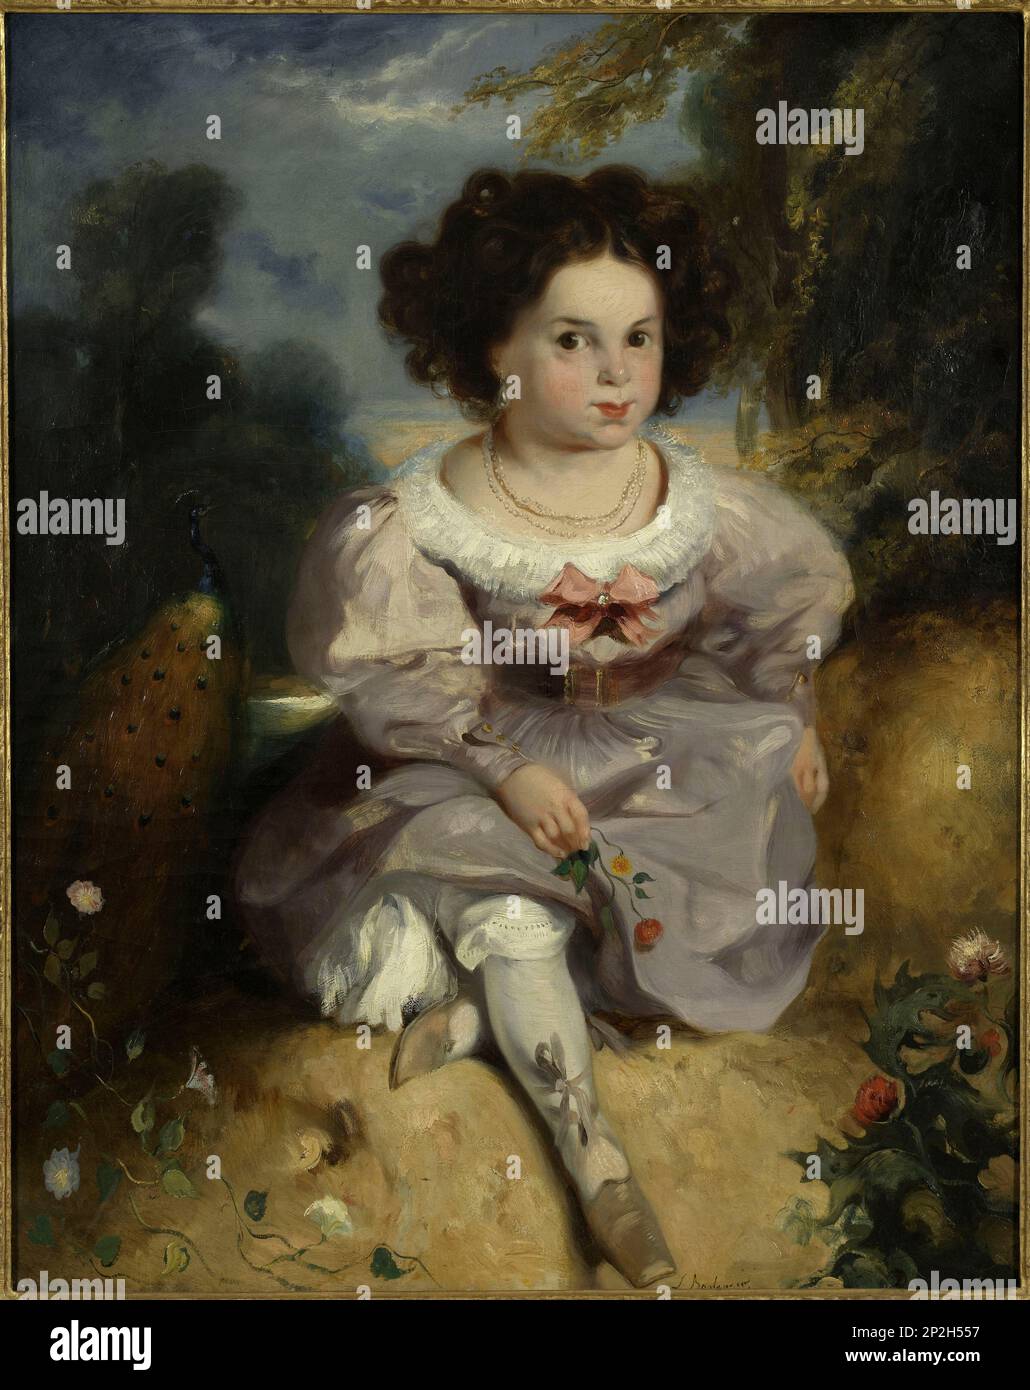 L&#xe9;opoldine Hugo at the Age of 4, c. 1828. Found in the collection of the Maison de Victor Hugo. Stock Photo